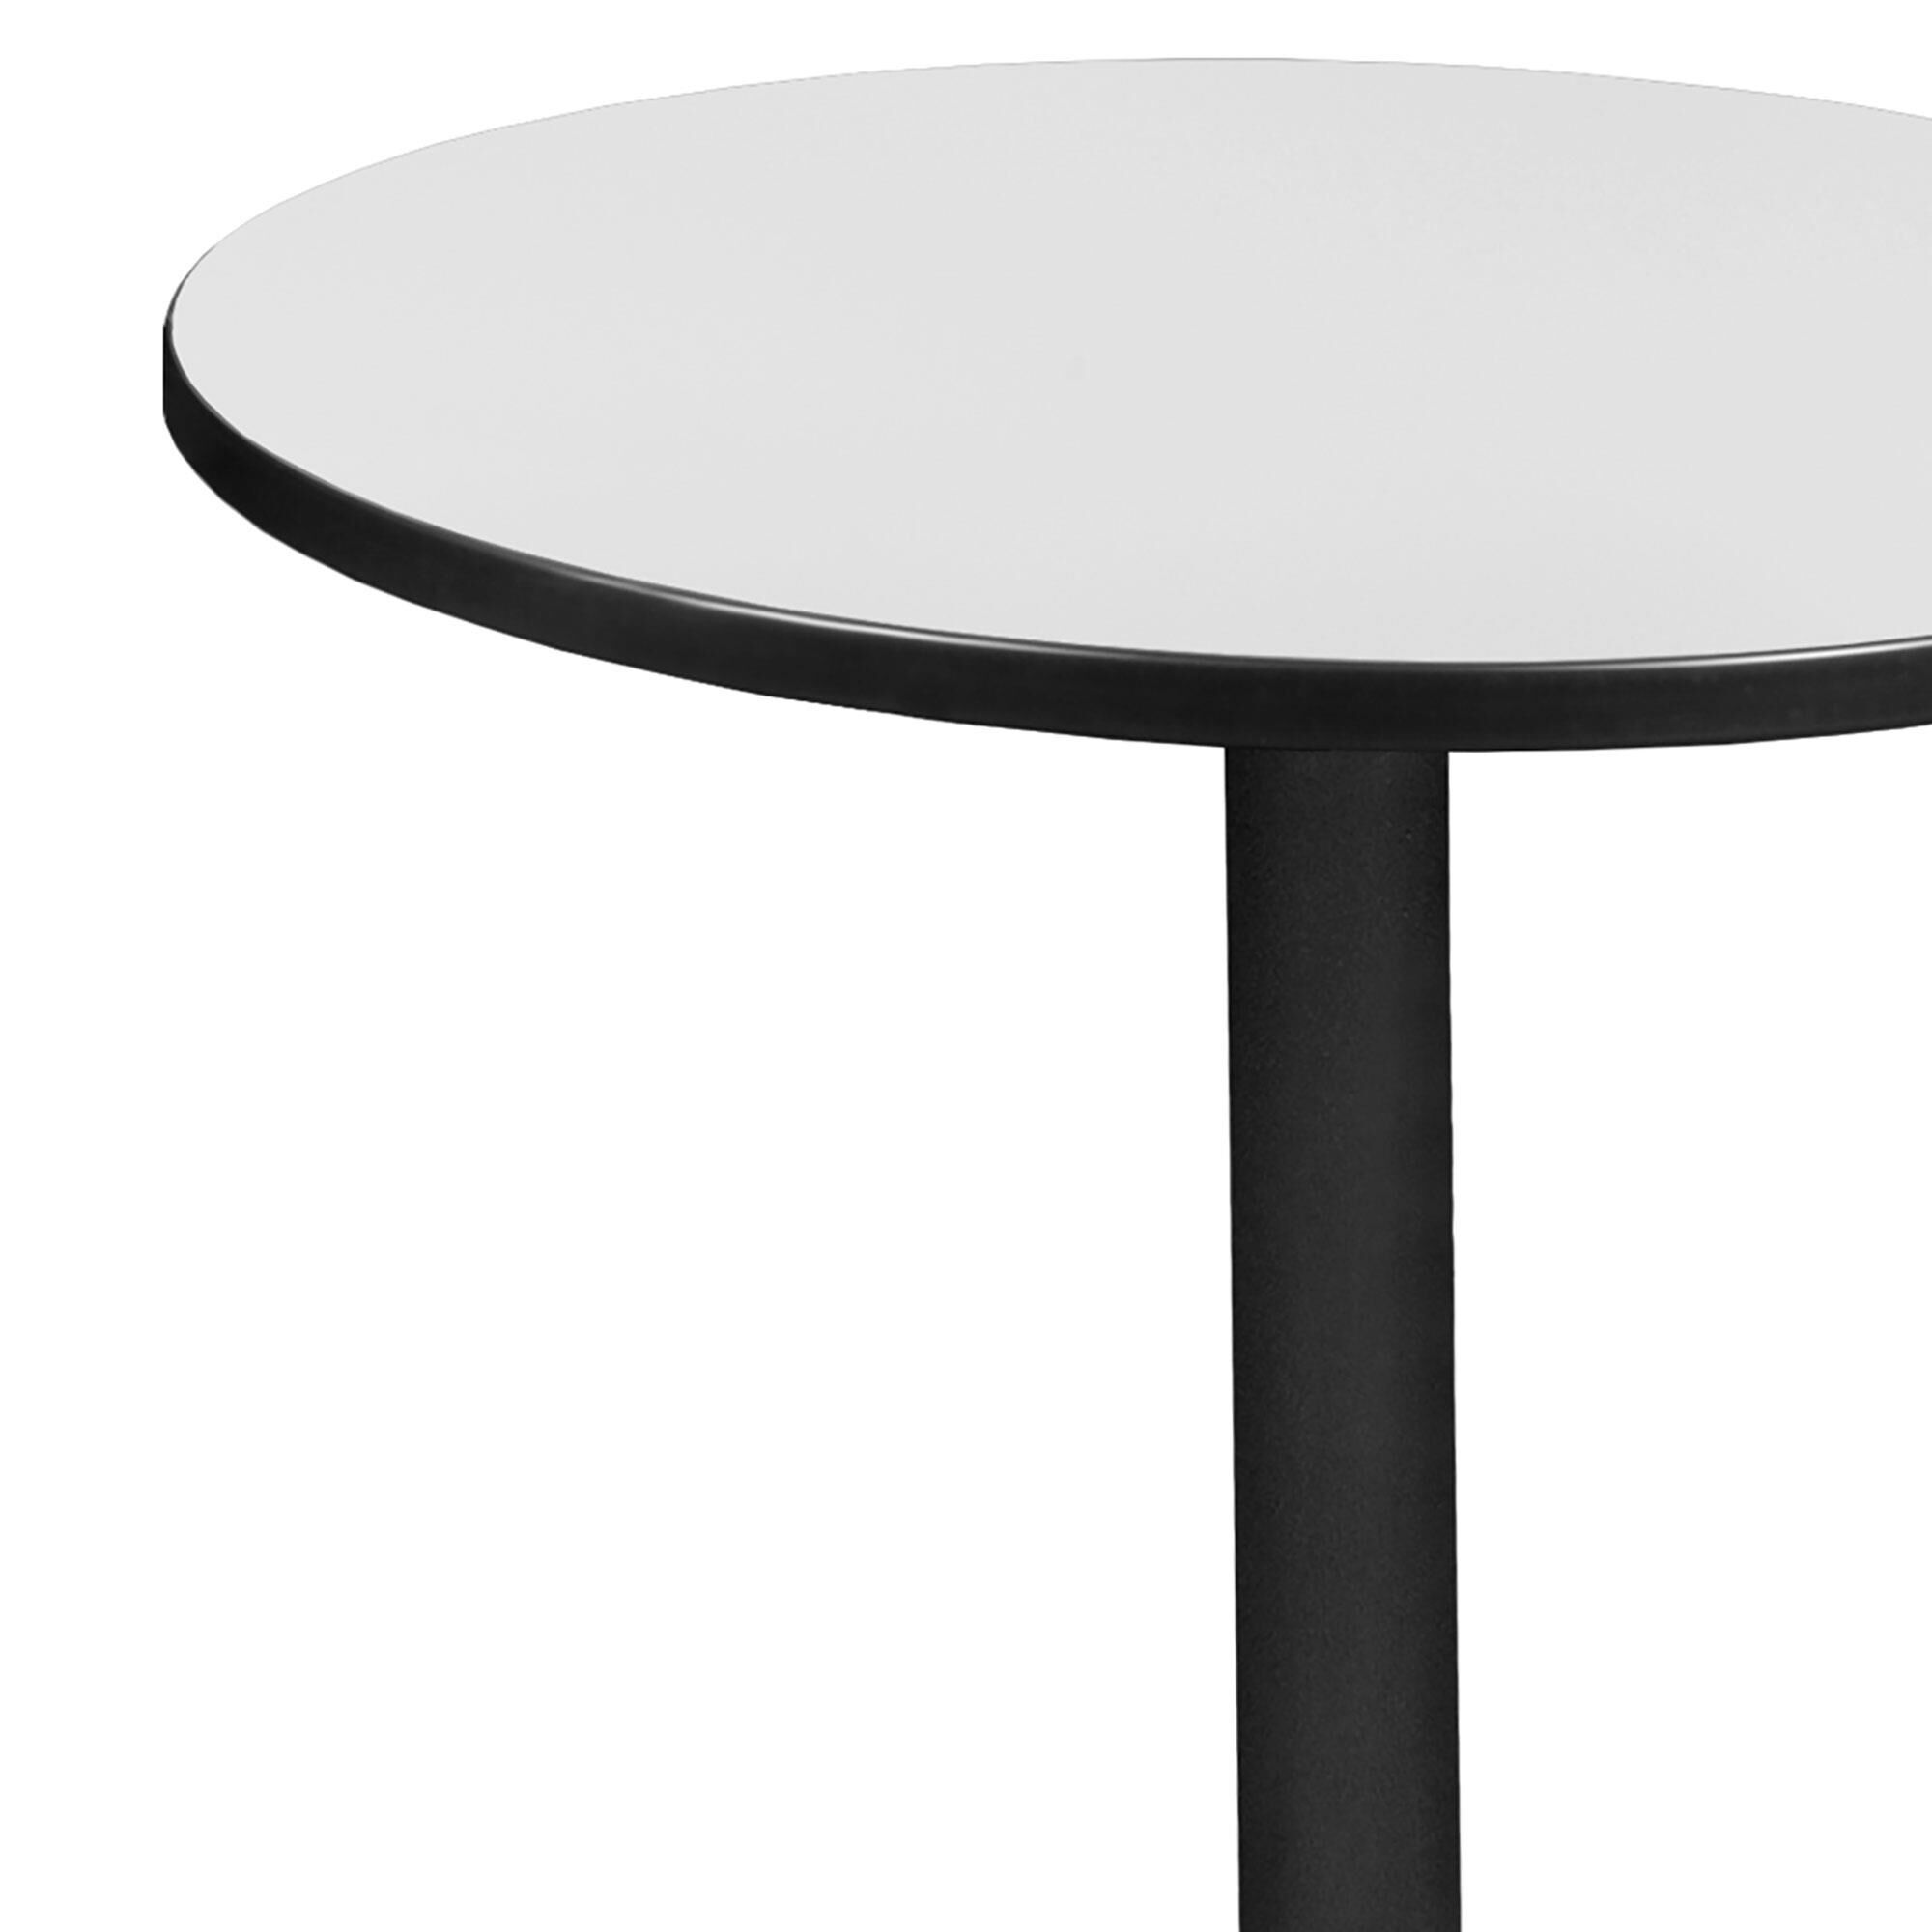 Regency Global Sourcing Cain 30" Cafe Table In White | Nfm In 2022 Pertaining To Regency Cain Steel Coffee Tables (View 6 of 21)